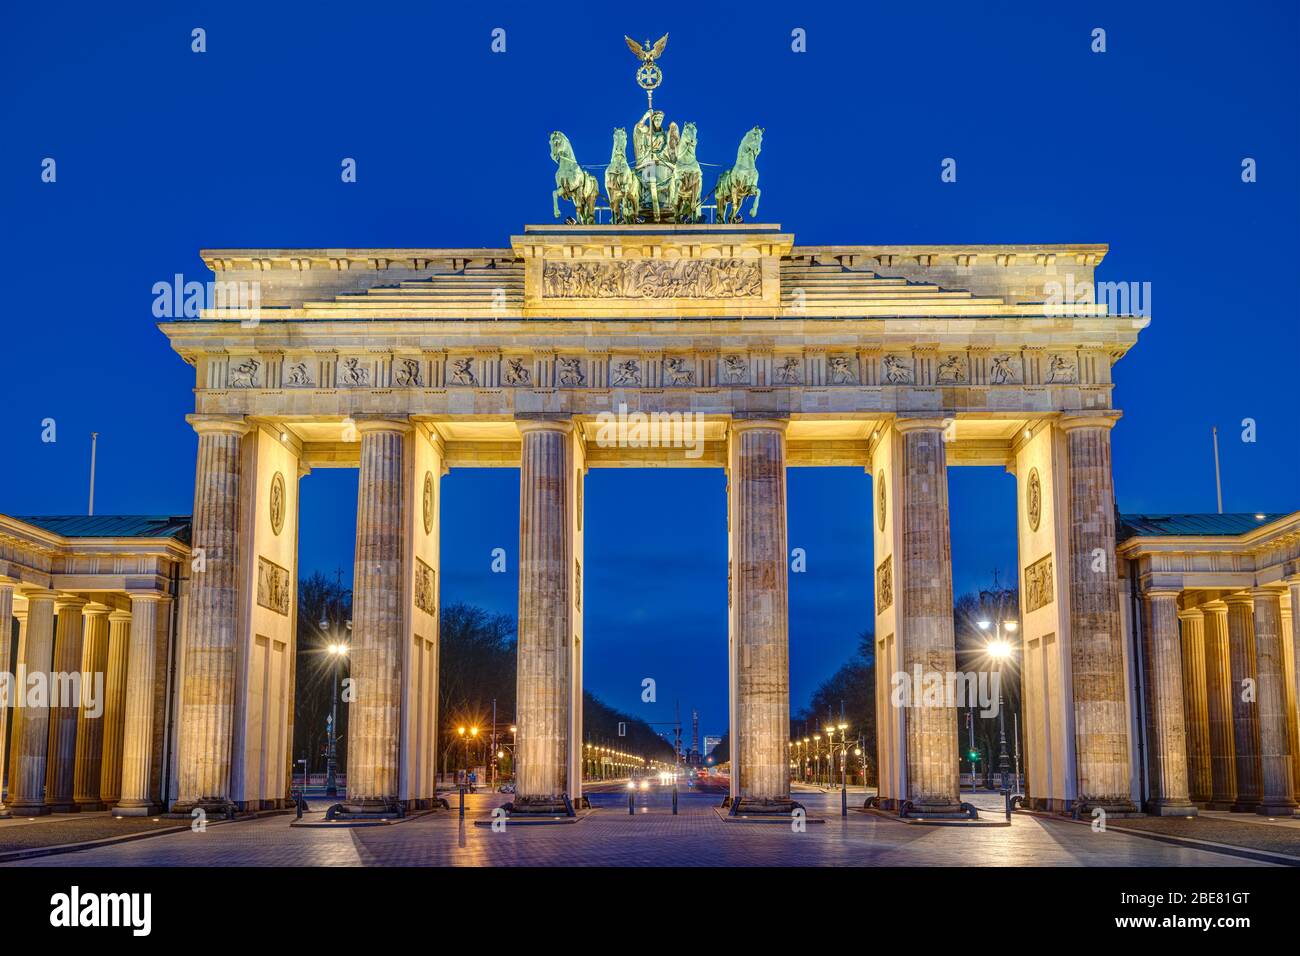 The famous Brandenburg Gate in Berlin at dawn Stock Photo